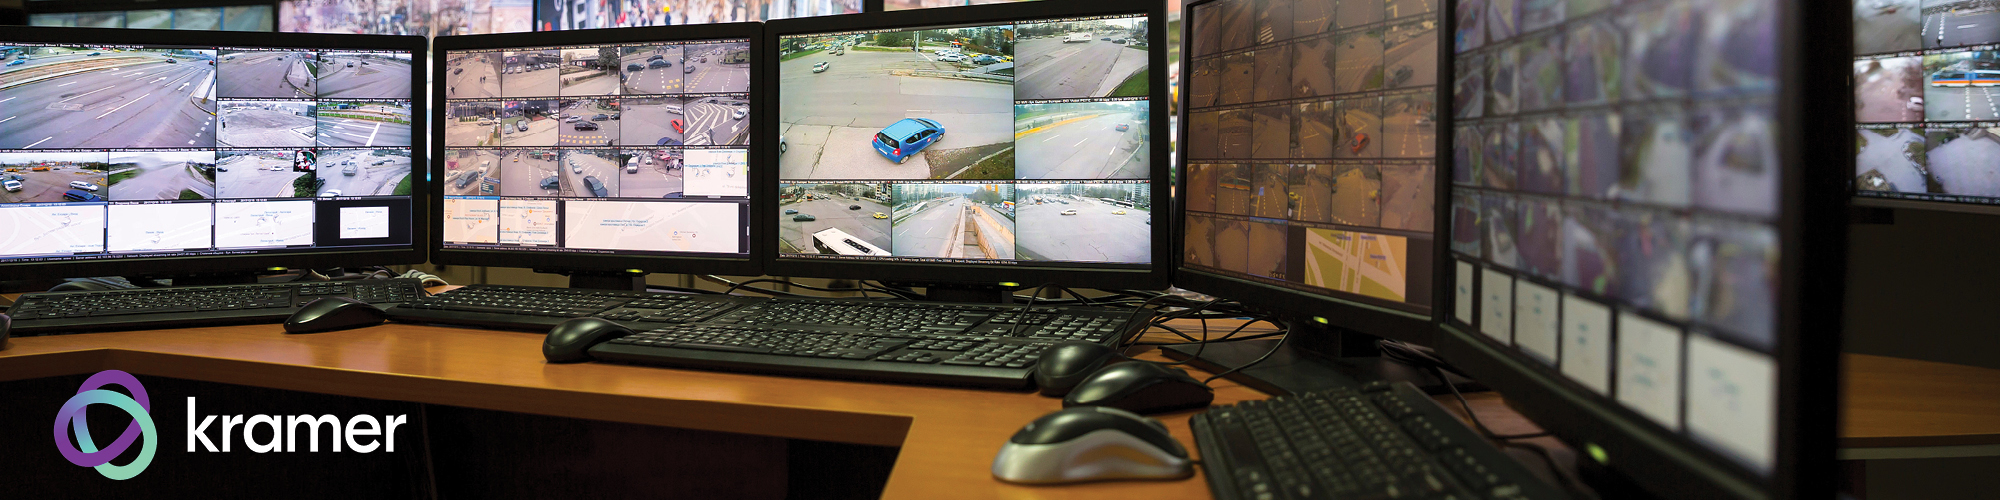 Regional government boosts municipalities’ management capabilities with Kramer’s urban CCC solution